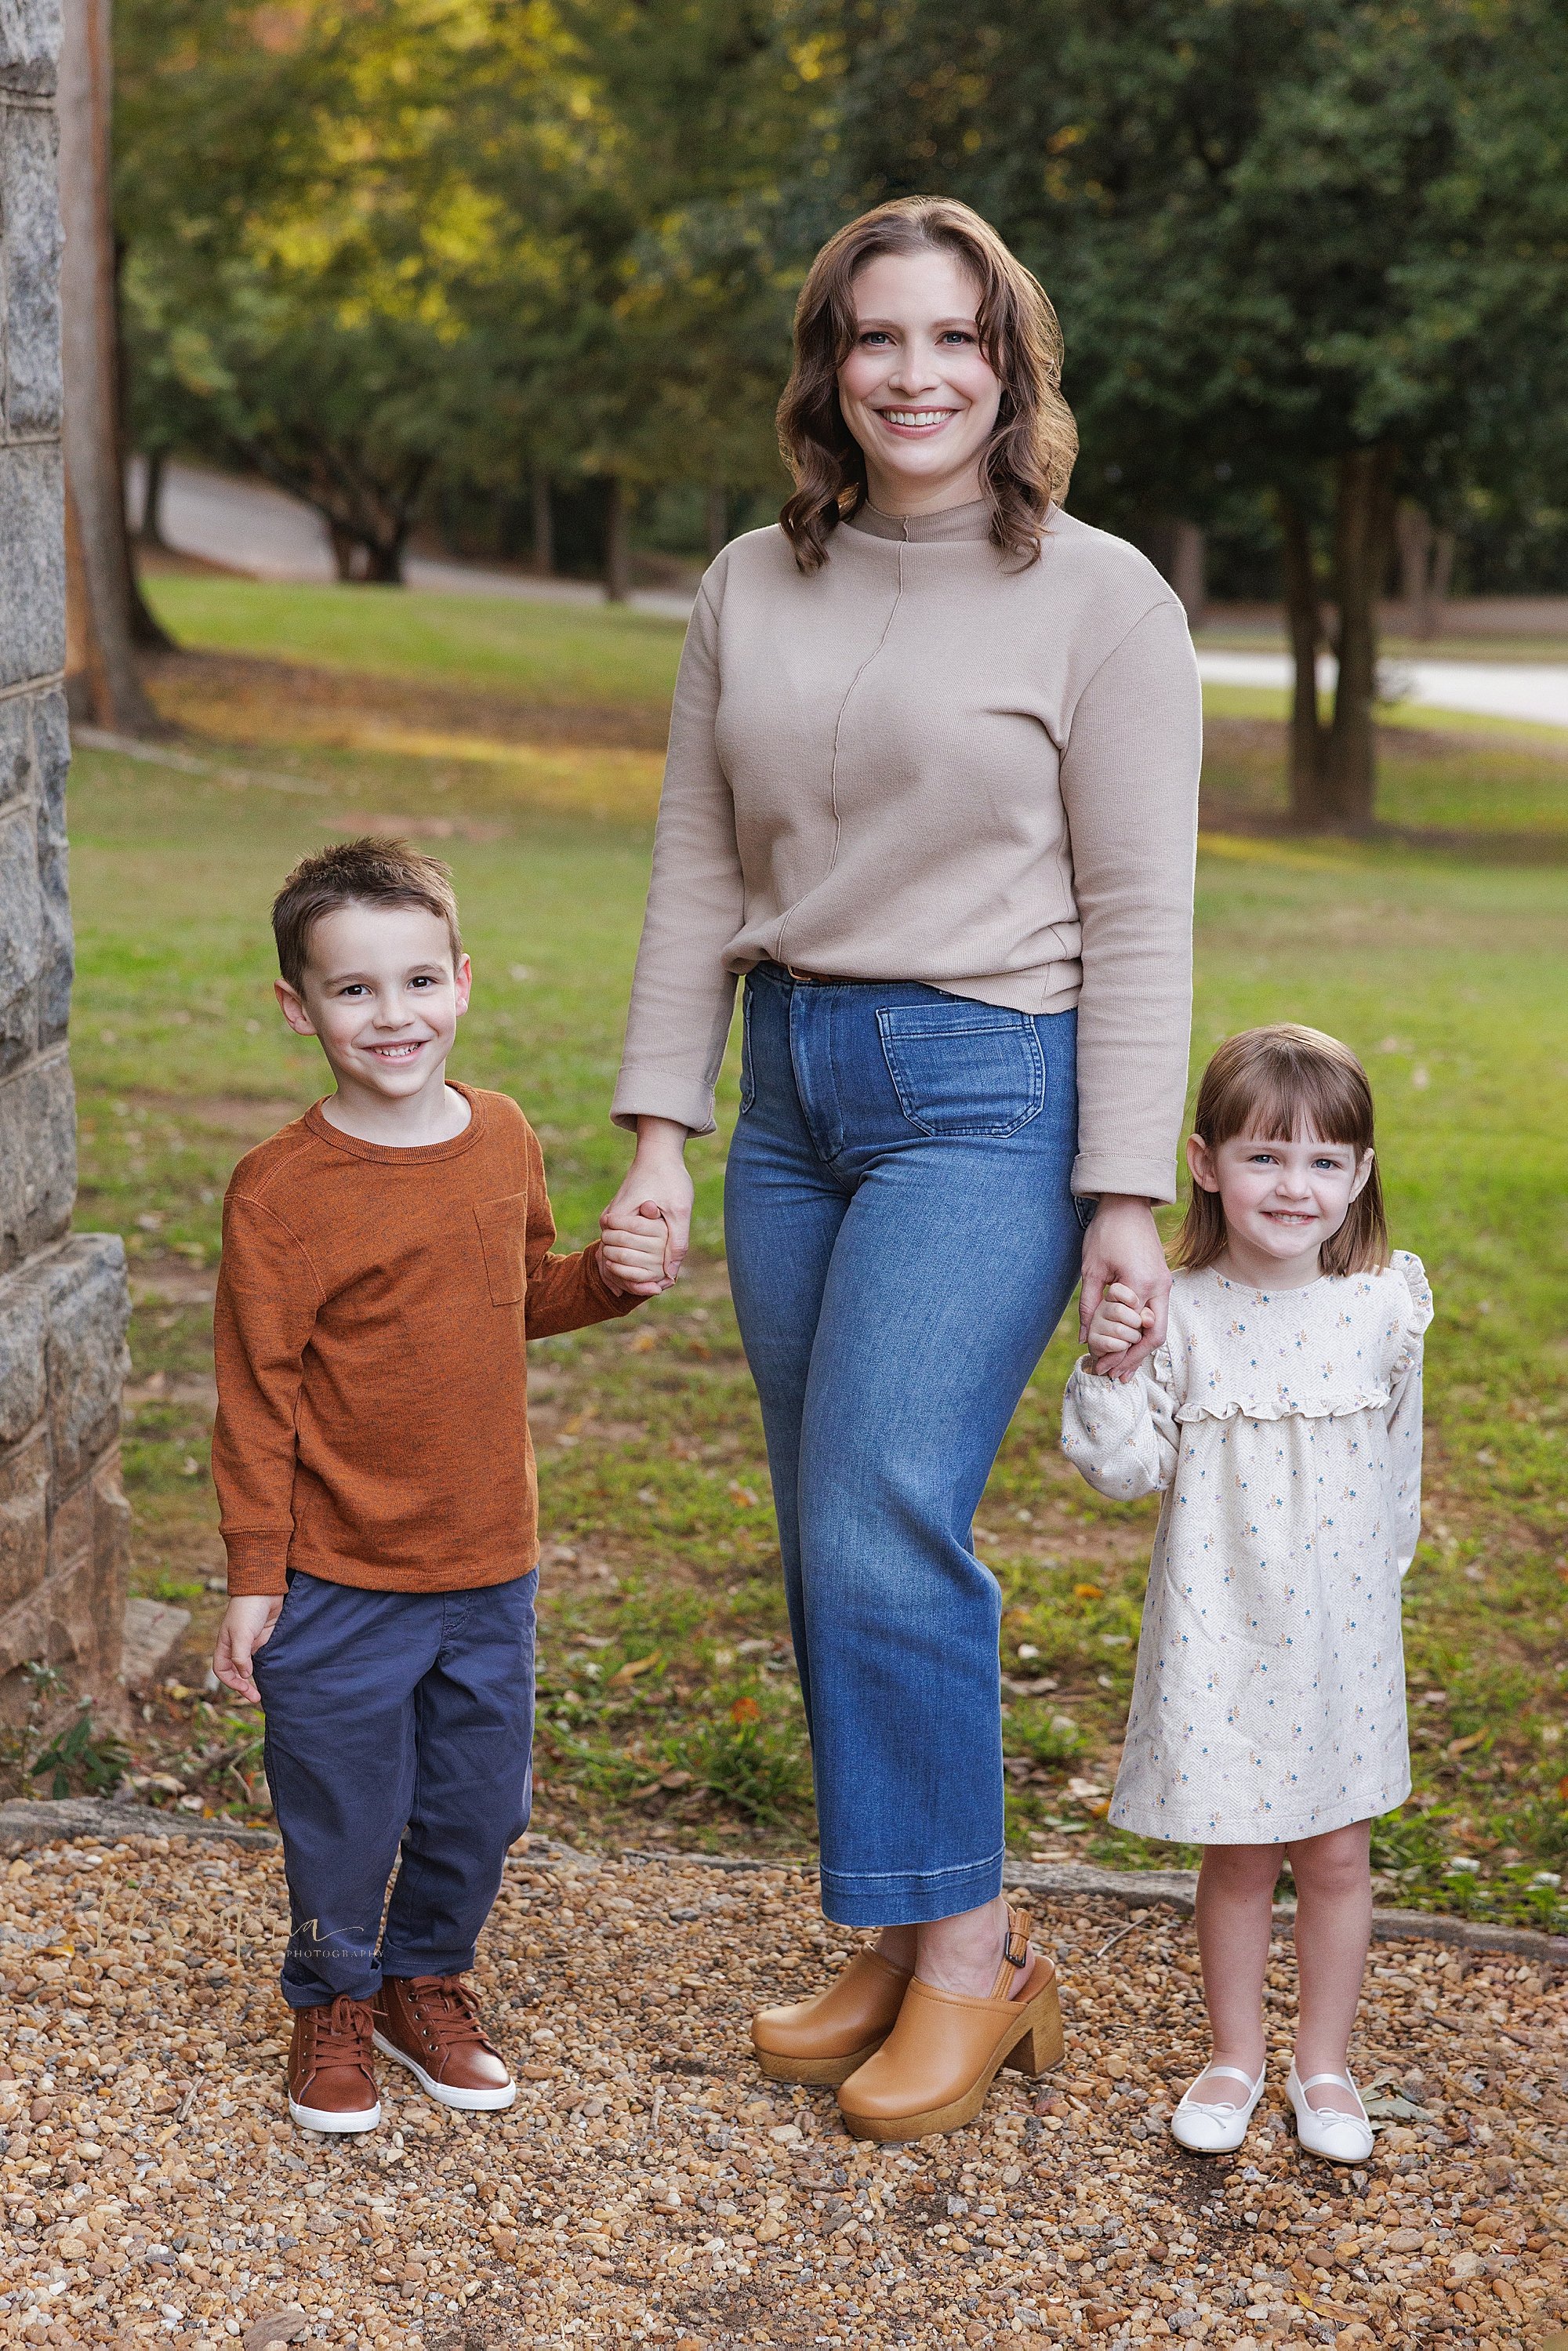 intown-atlanta-decatur-brookhaven-buckhead-outdoor-fall-pictures-family-photoshoot_5542.jpg